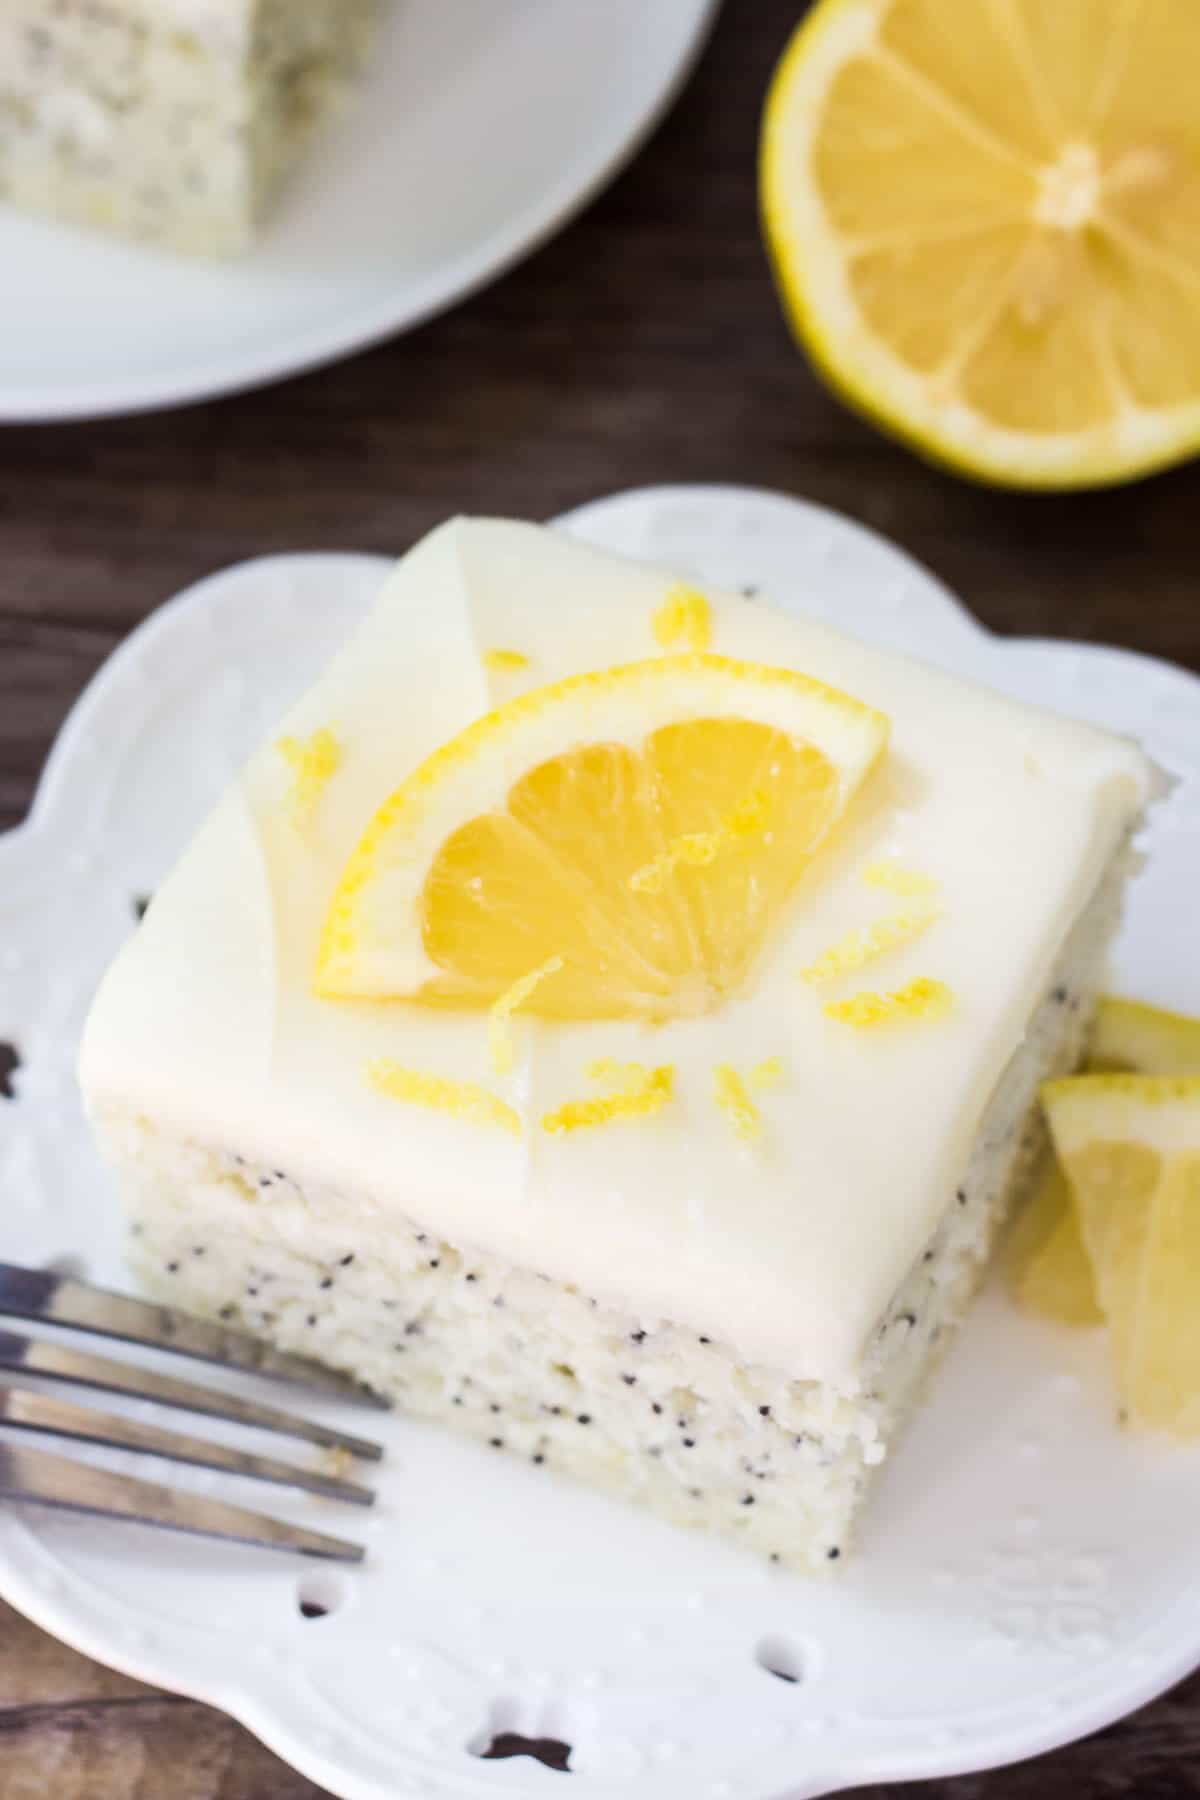 Slice of lemon poppy seed cake with cream cheese frosting on a white plate. Topped with a slice of lemon. 1/2 lemon and second slice of cake in the background.